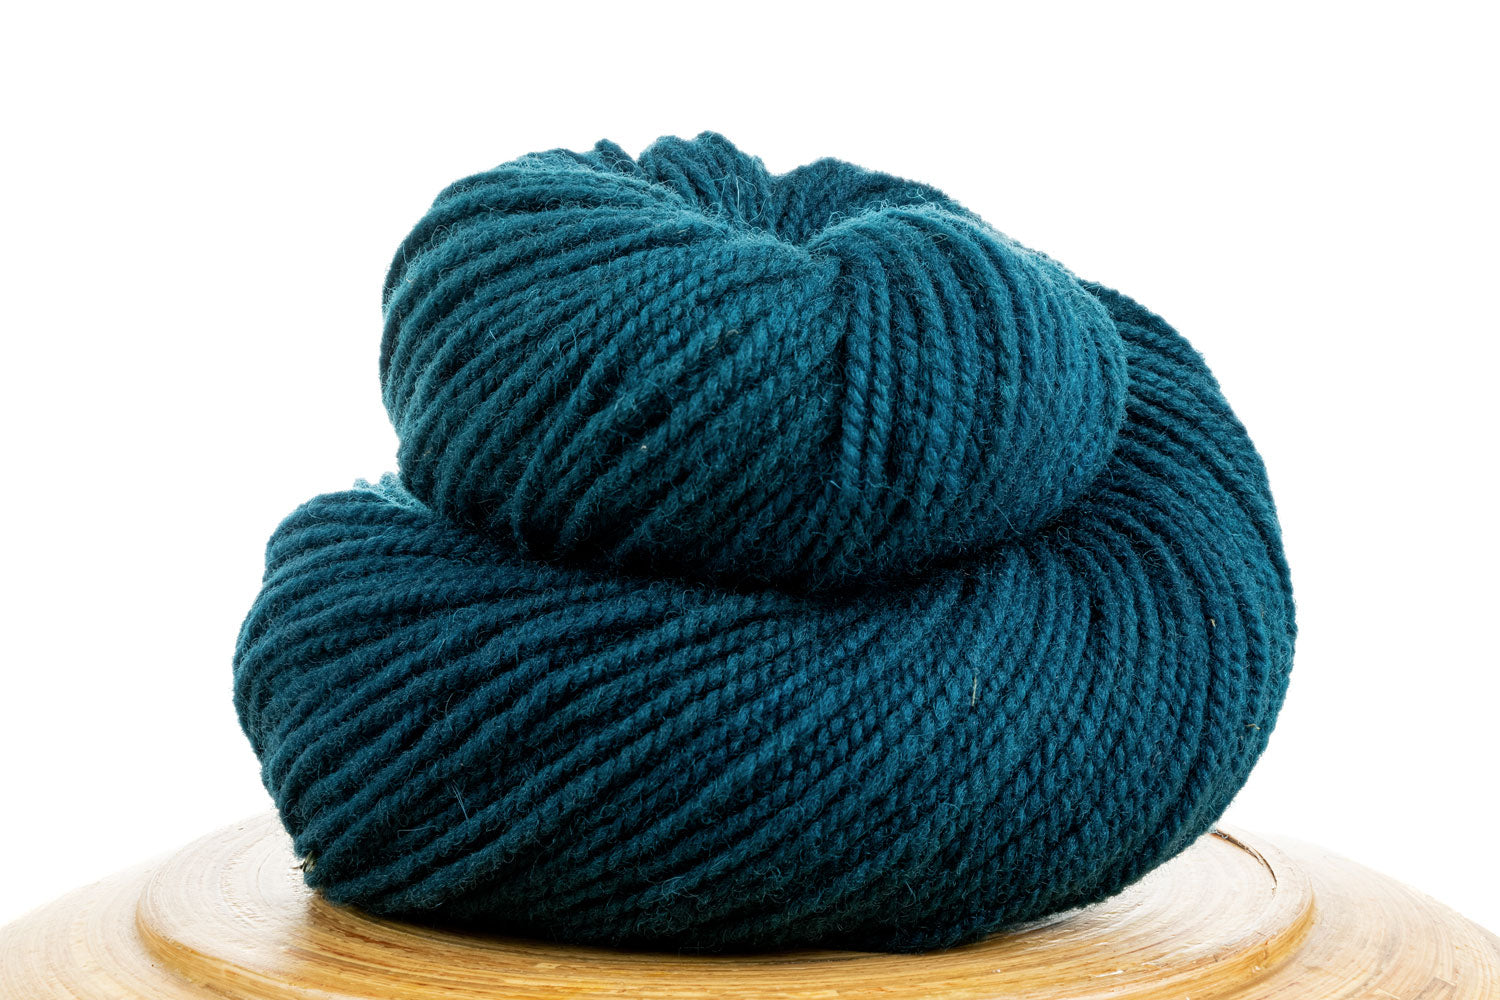 Winfield Canadian hand-dyed yarn in Enchanted River, a dark teal